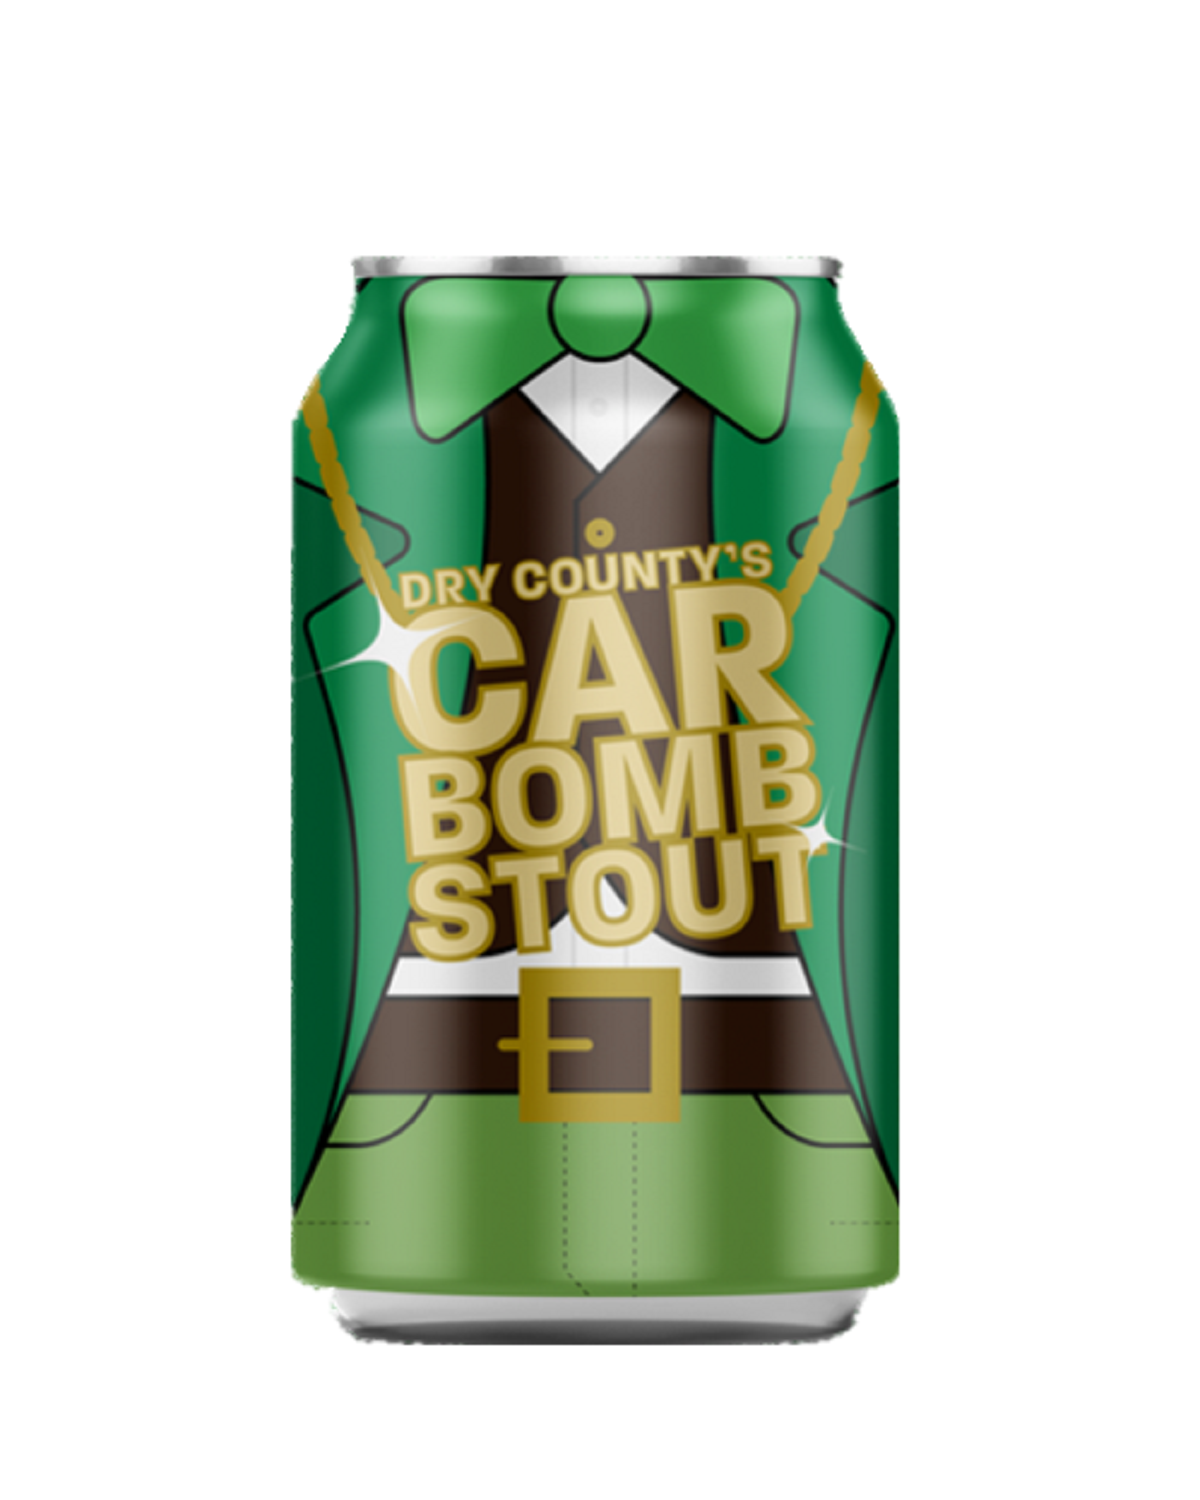 Dry County Car Bomb Stout 6pk can